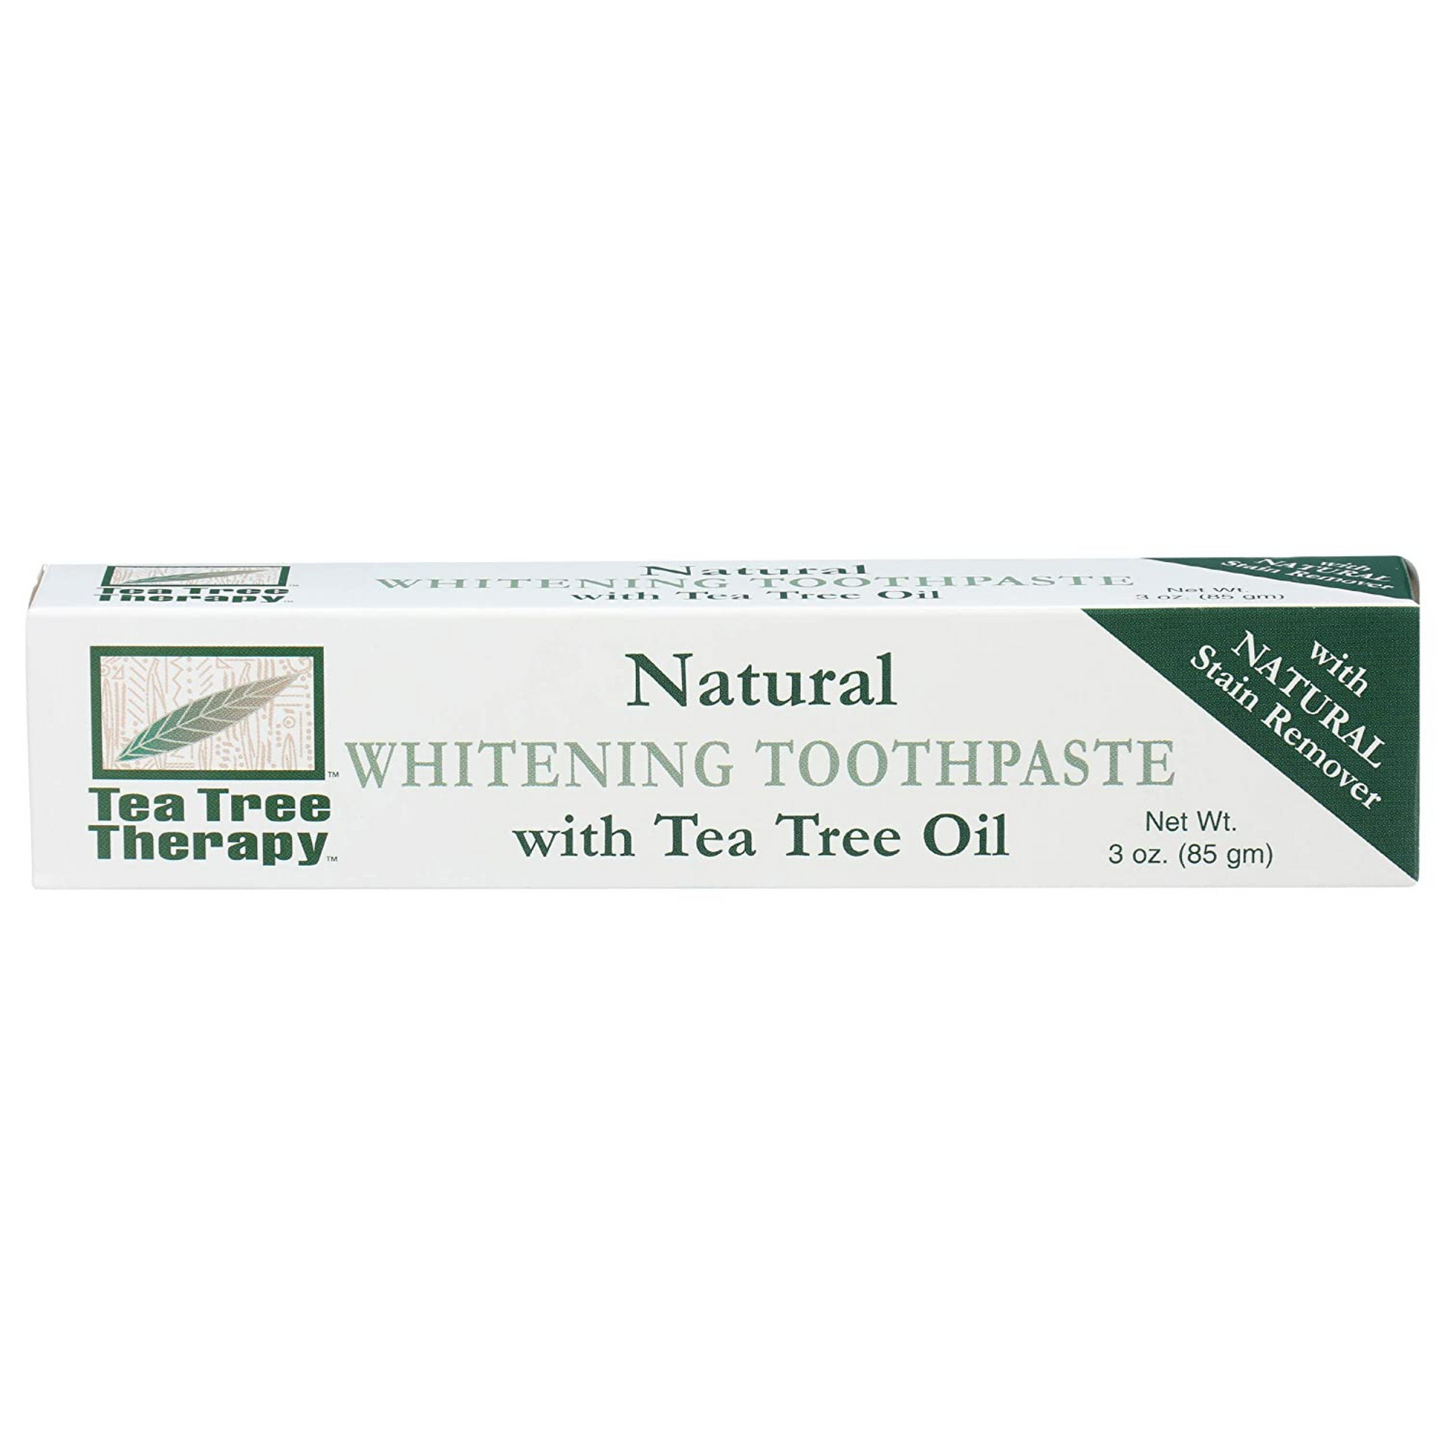 Primary Image of Tea Tree Therapy Natural Whitening Toothpaste (3 oz)